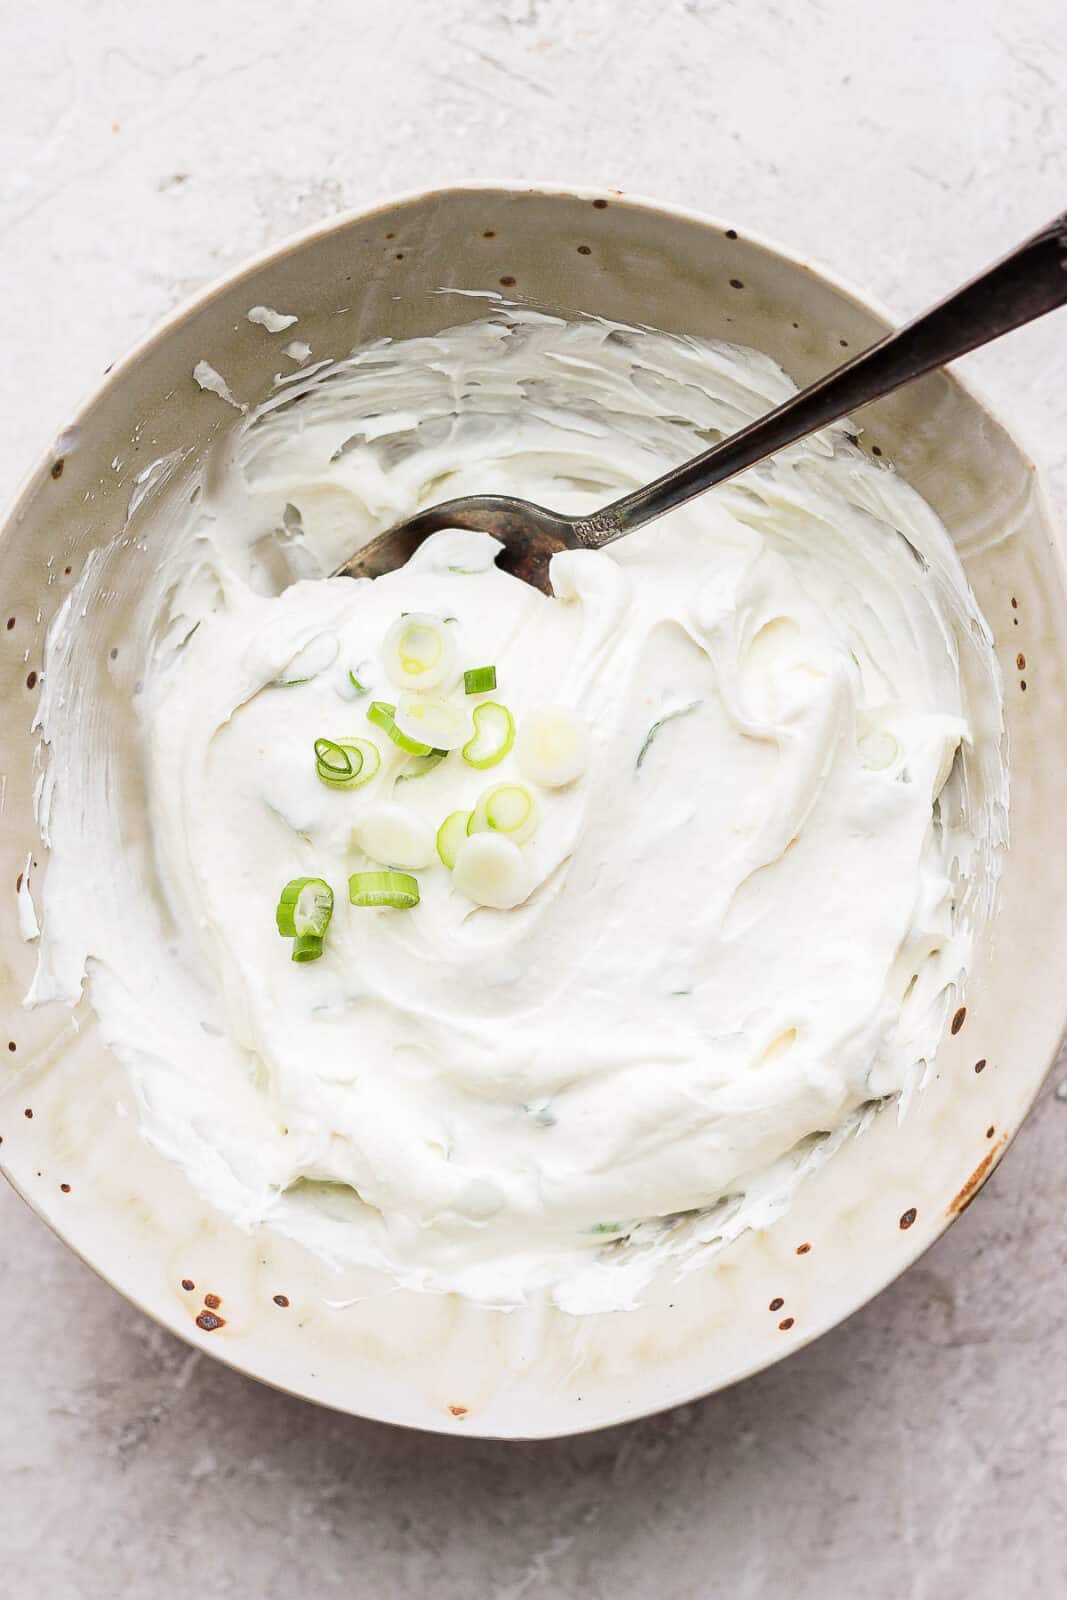 Cream cheese all mixed together.